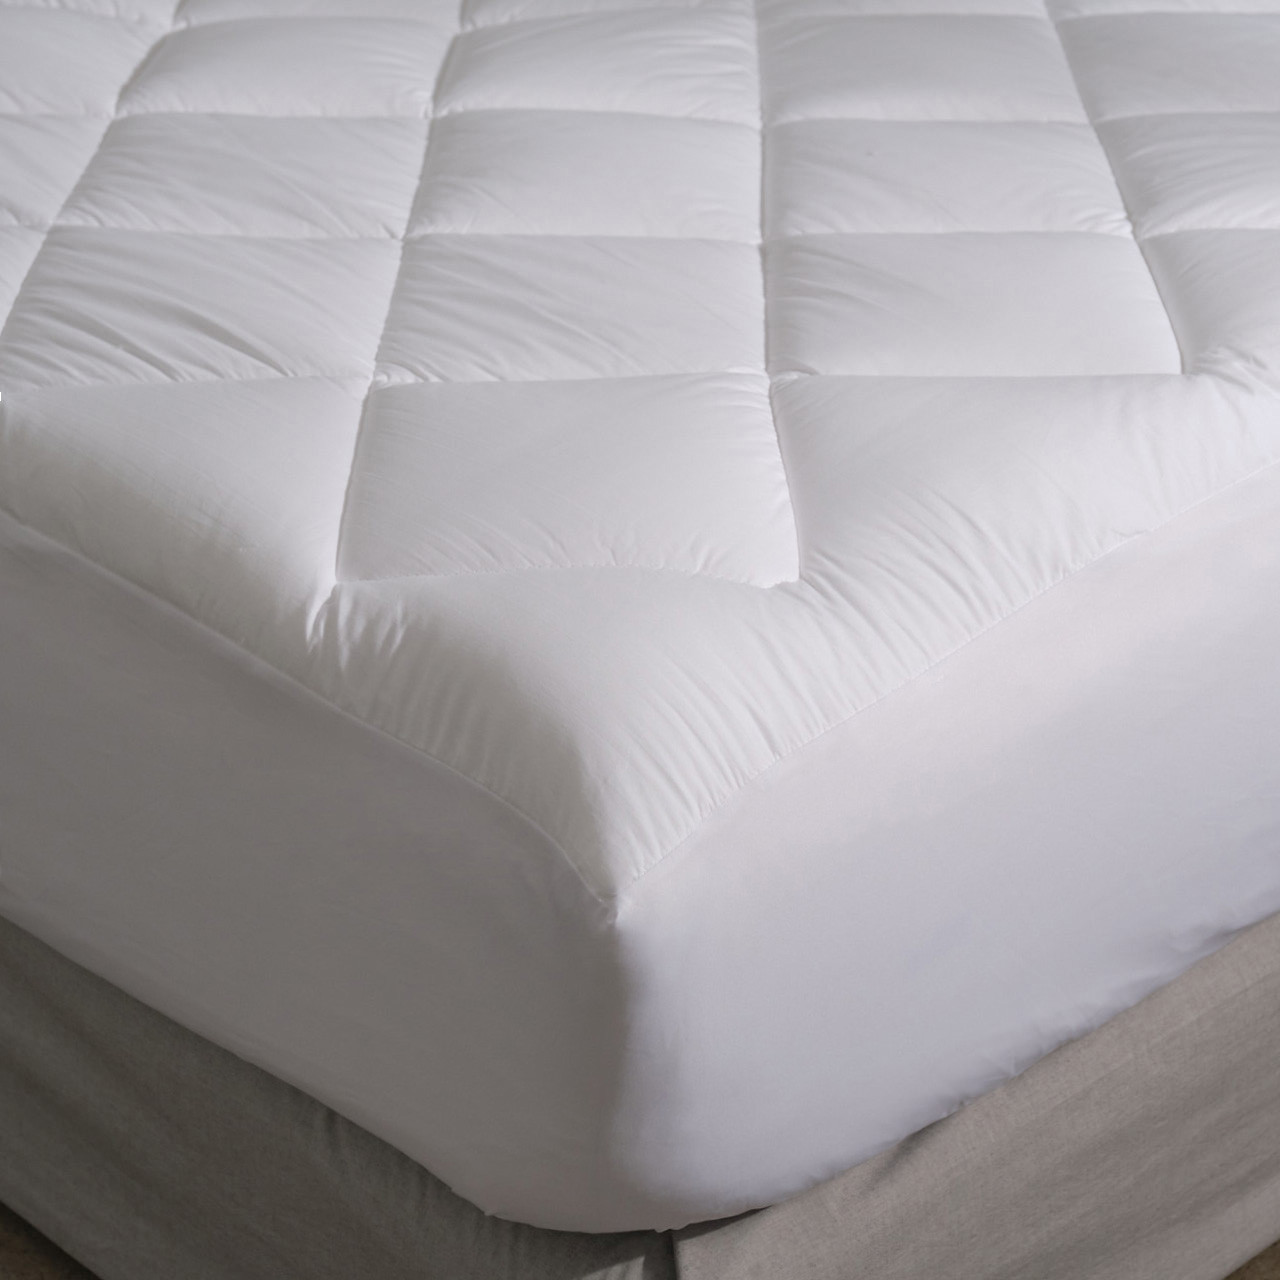 Microfibre Mattress Protector Quilted Easy Care Finish Machine Wash All Sizes 